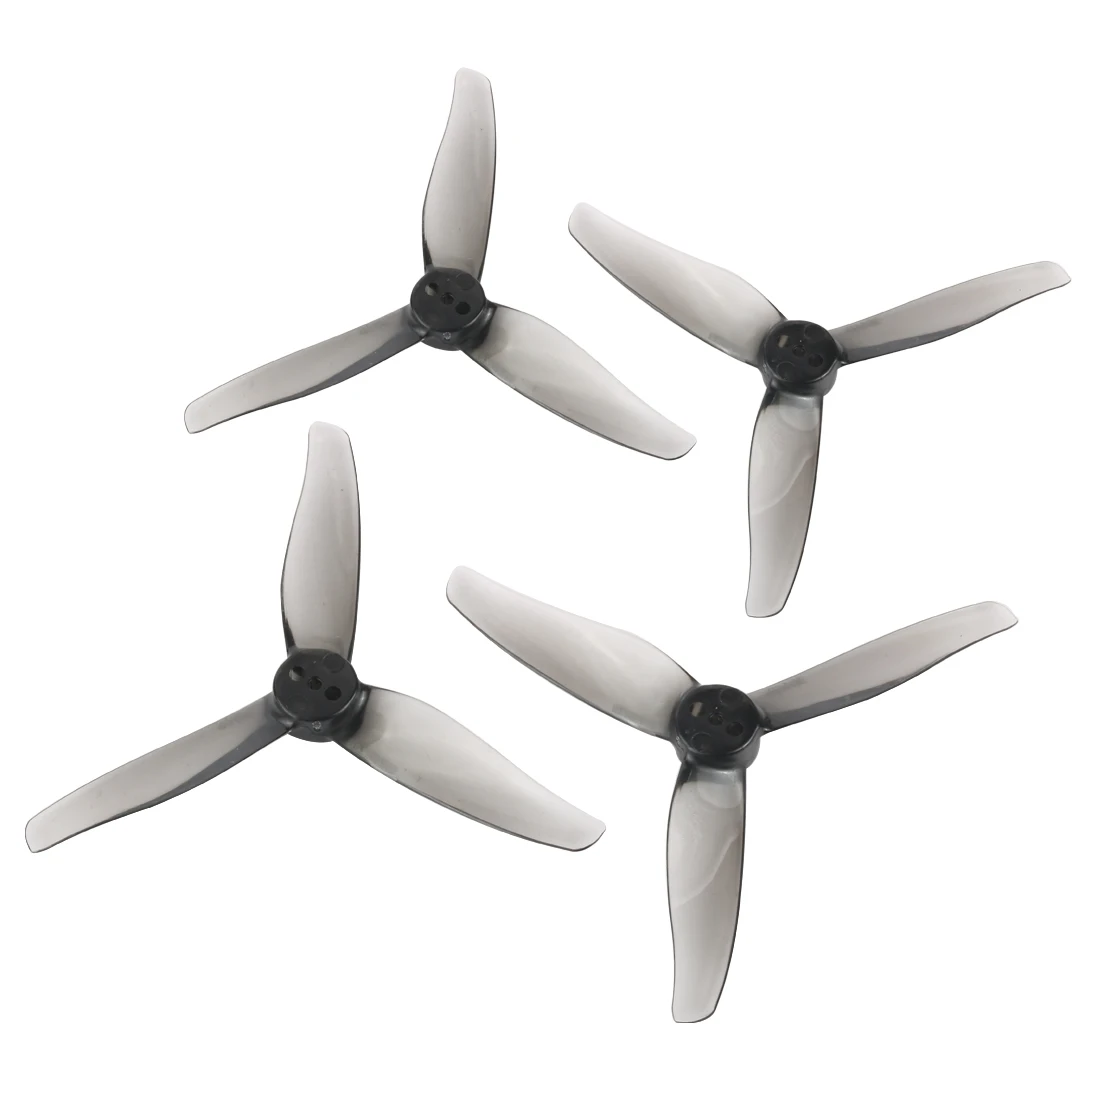 

2 pairs Gemfan 3016 Propeller 1.5m 2mm Hole 3 inch 3-Paddle CW CCW FPV Propeller Mini Props For 3inch FPV Racing Drone